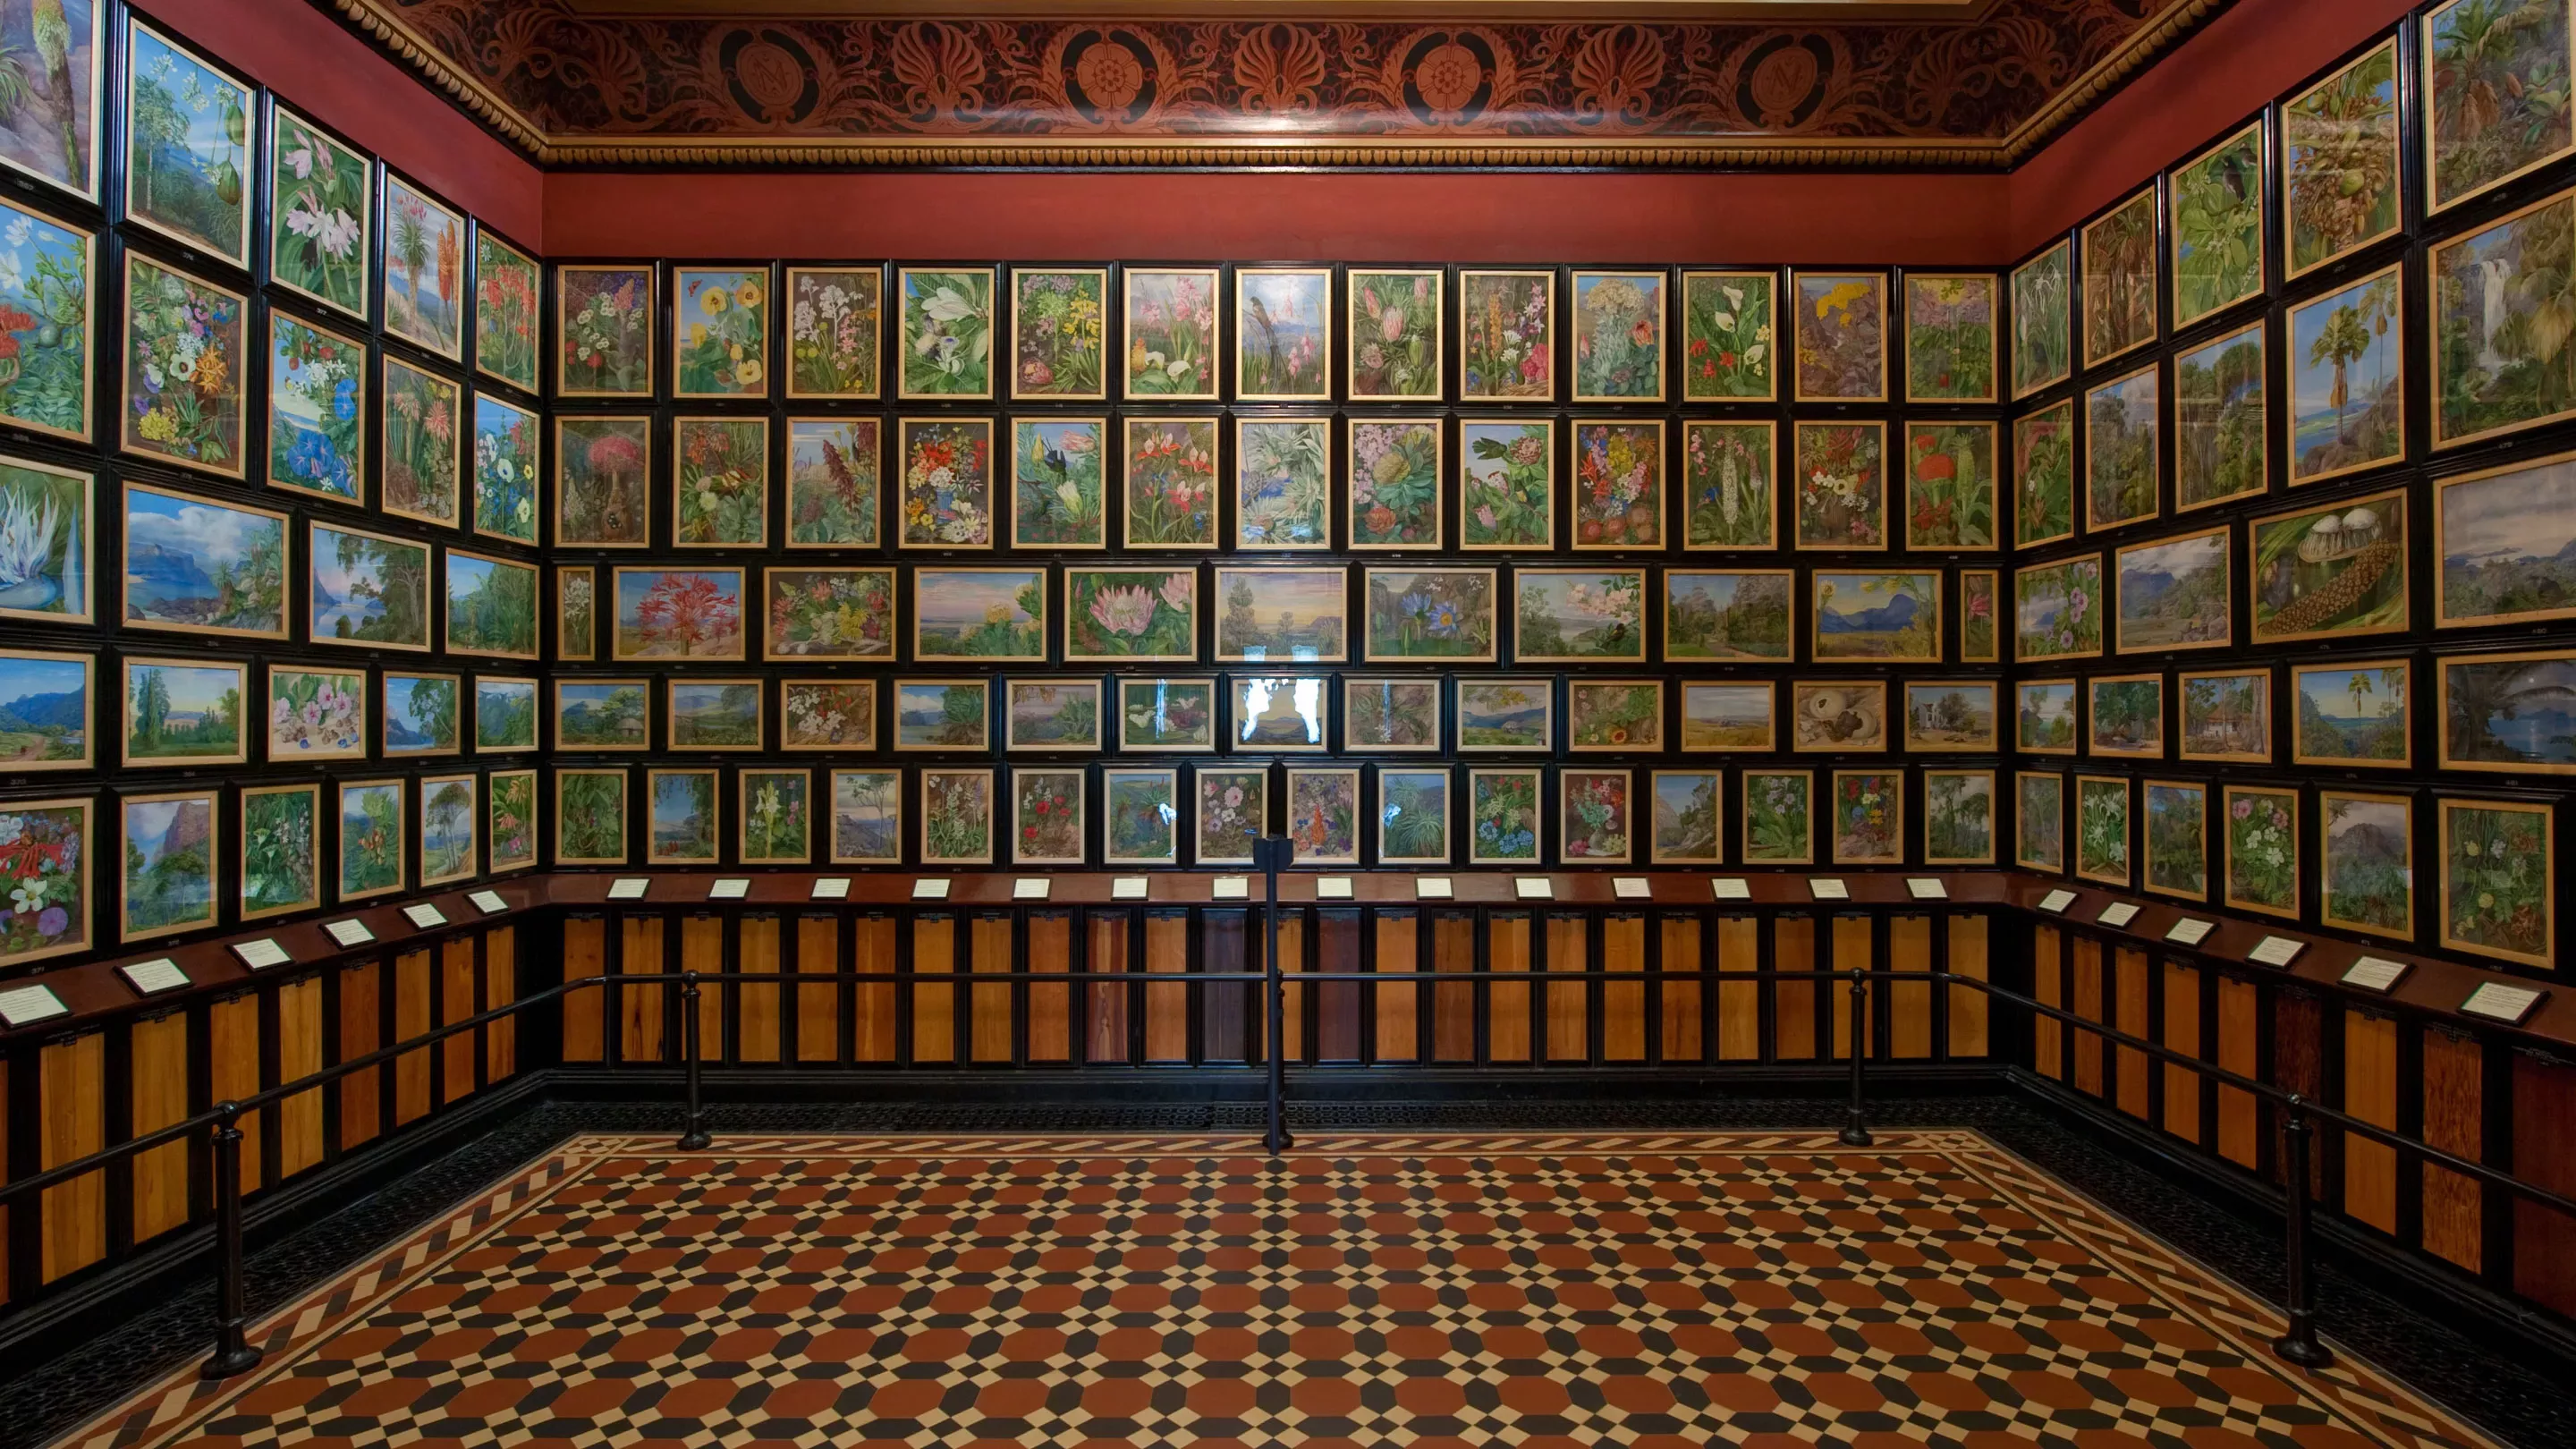 The Marianne North Gallery 